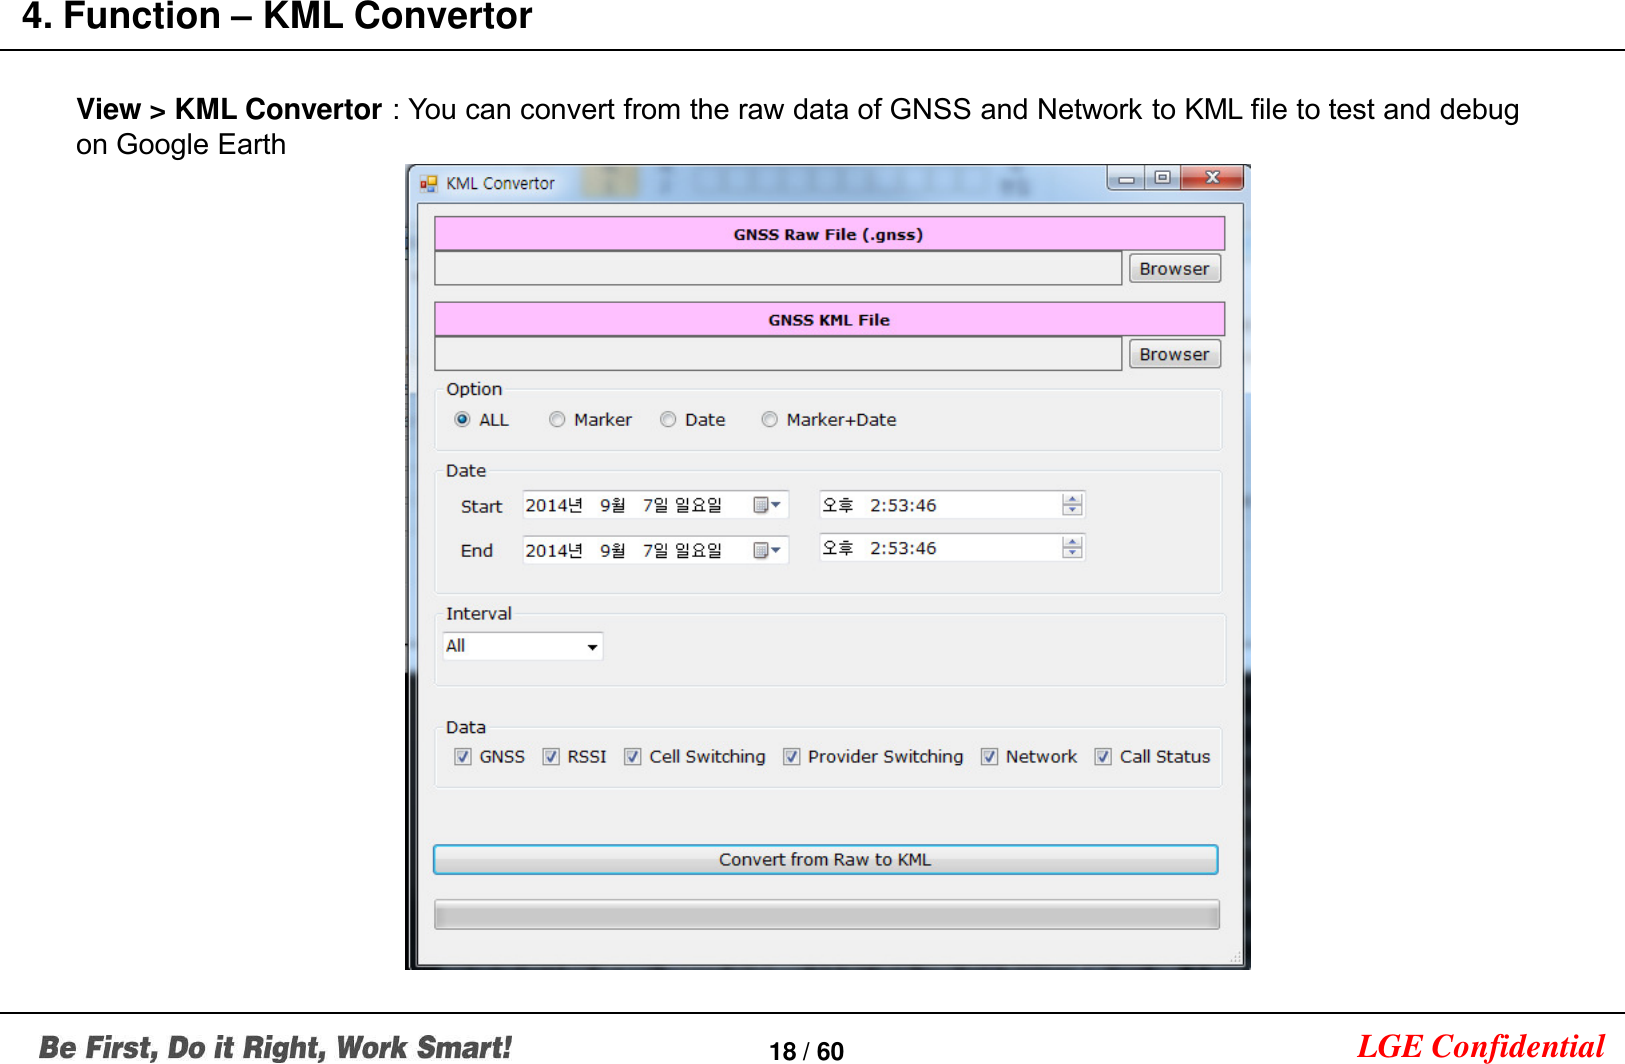 LGE Confidential4. Function –KML Convertor18 / 60View &gt; KML Convertor : You can convert from the raw data of GNSS and Network to KML file to test and debug on Google Earth